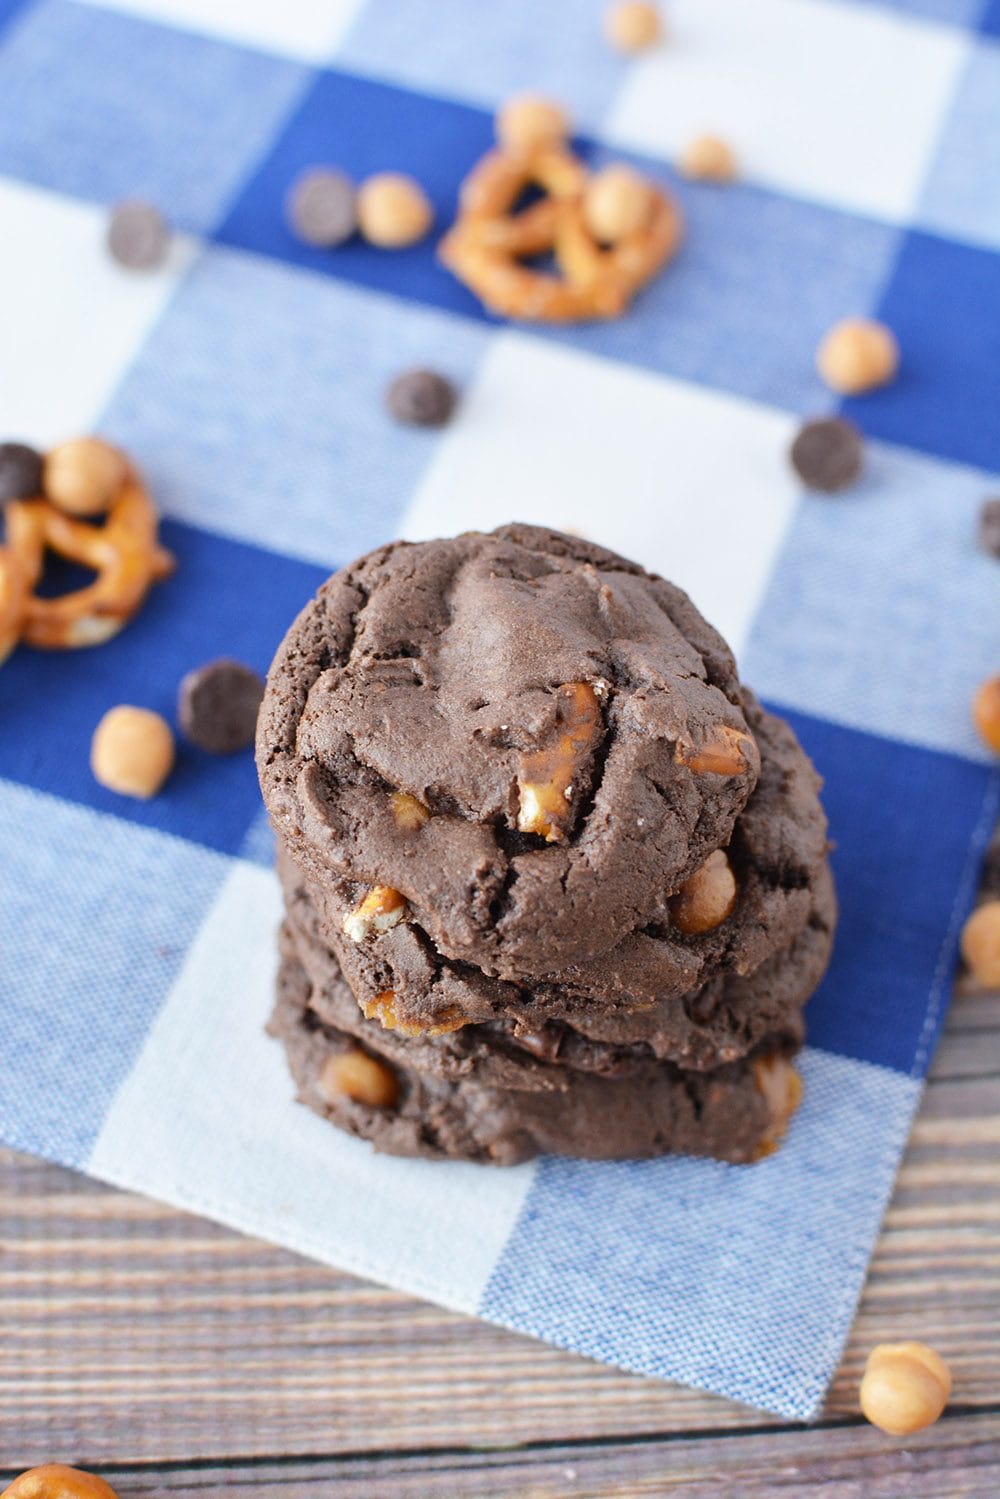 Chocolate cookies with caramel and pretzels